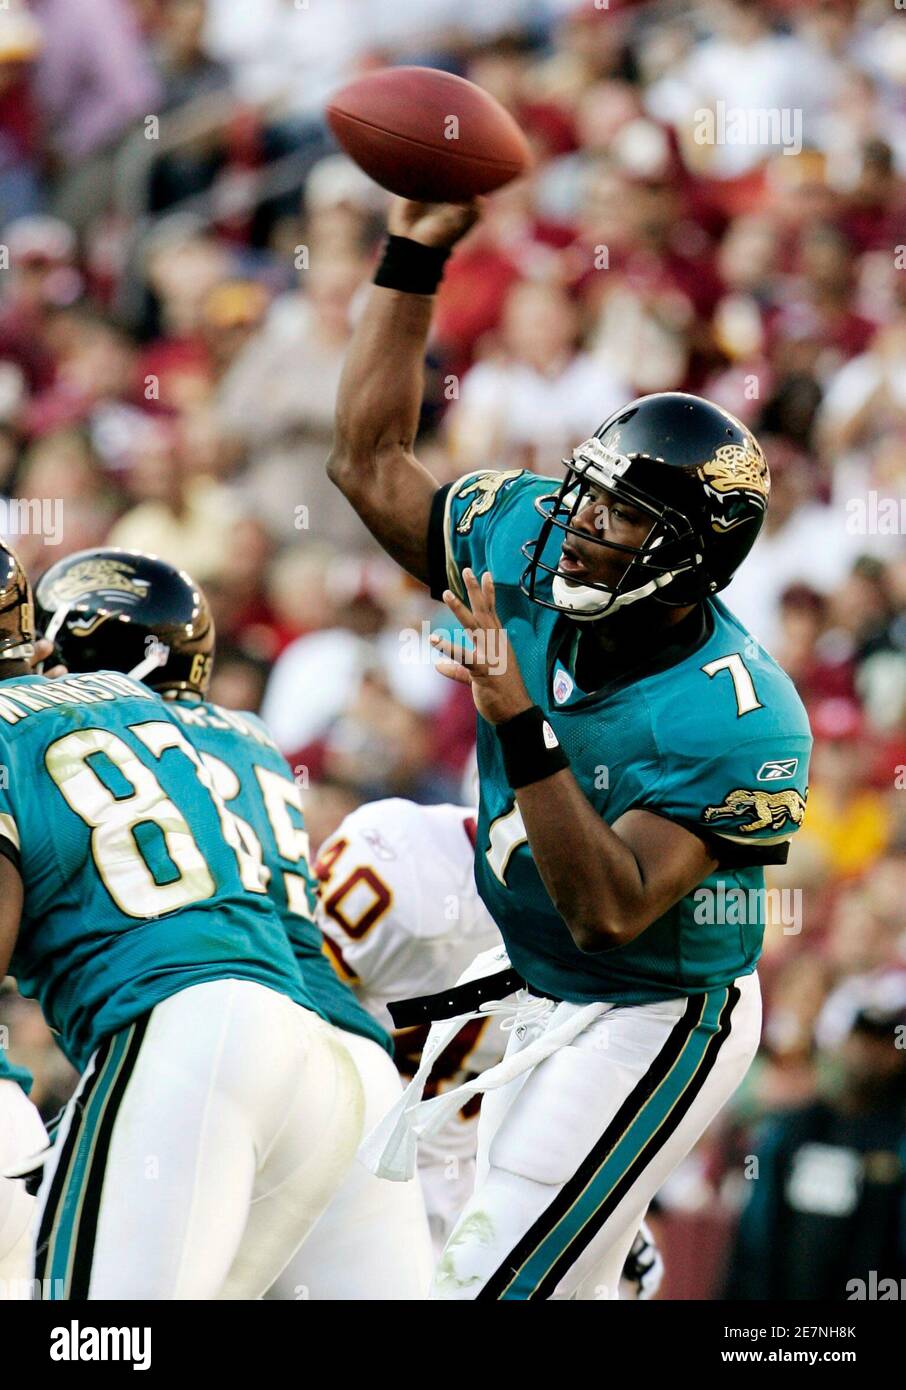 Jacksonville Jaguars quarterback Byron Leftwich (R) throws during the first quarter of their NFL football game against the Washington Redskins in Landover, Maryland October 1, 2006.     REUTERS/Gary Cameron  (UNITED STATES) Stock Photo